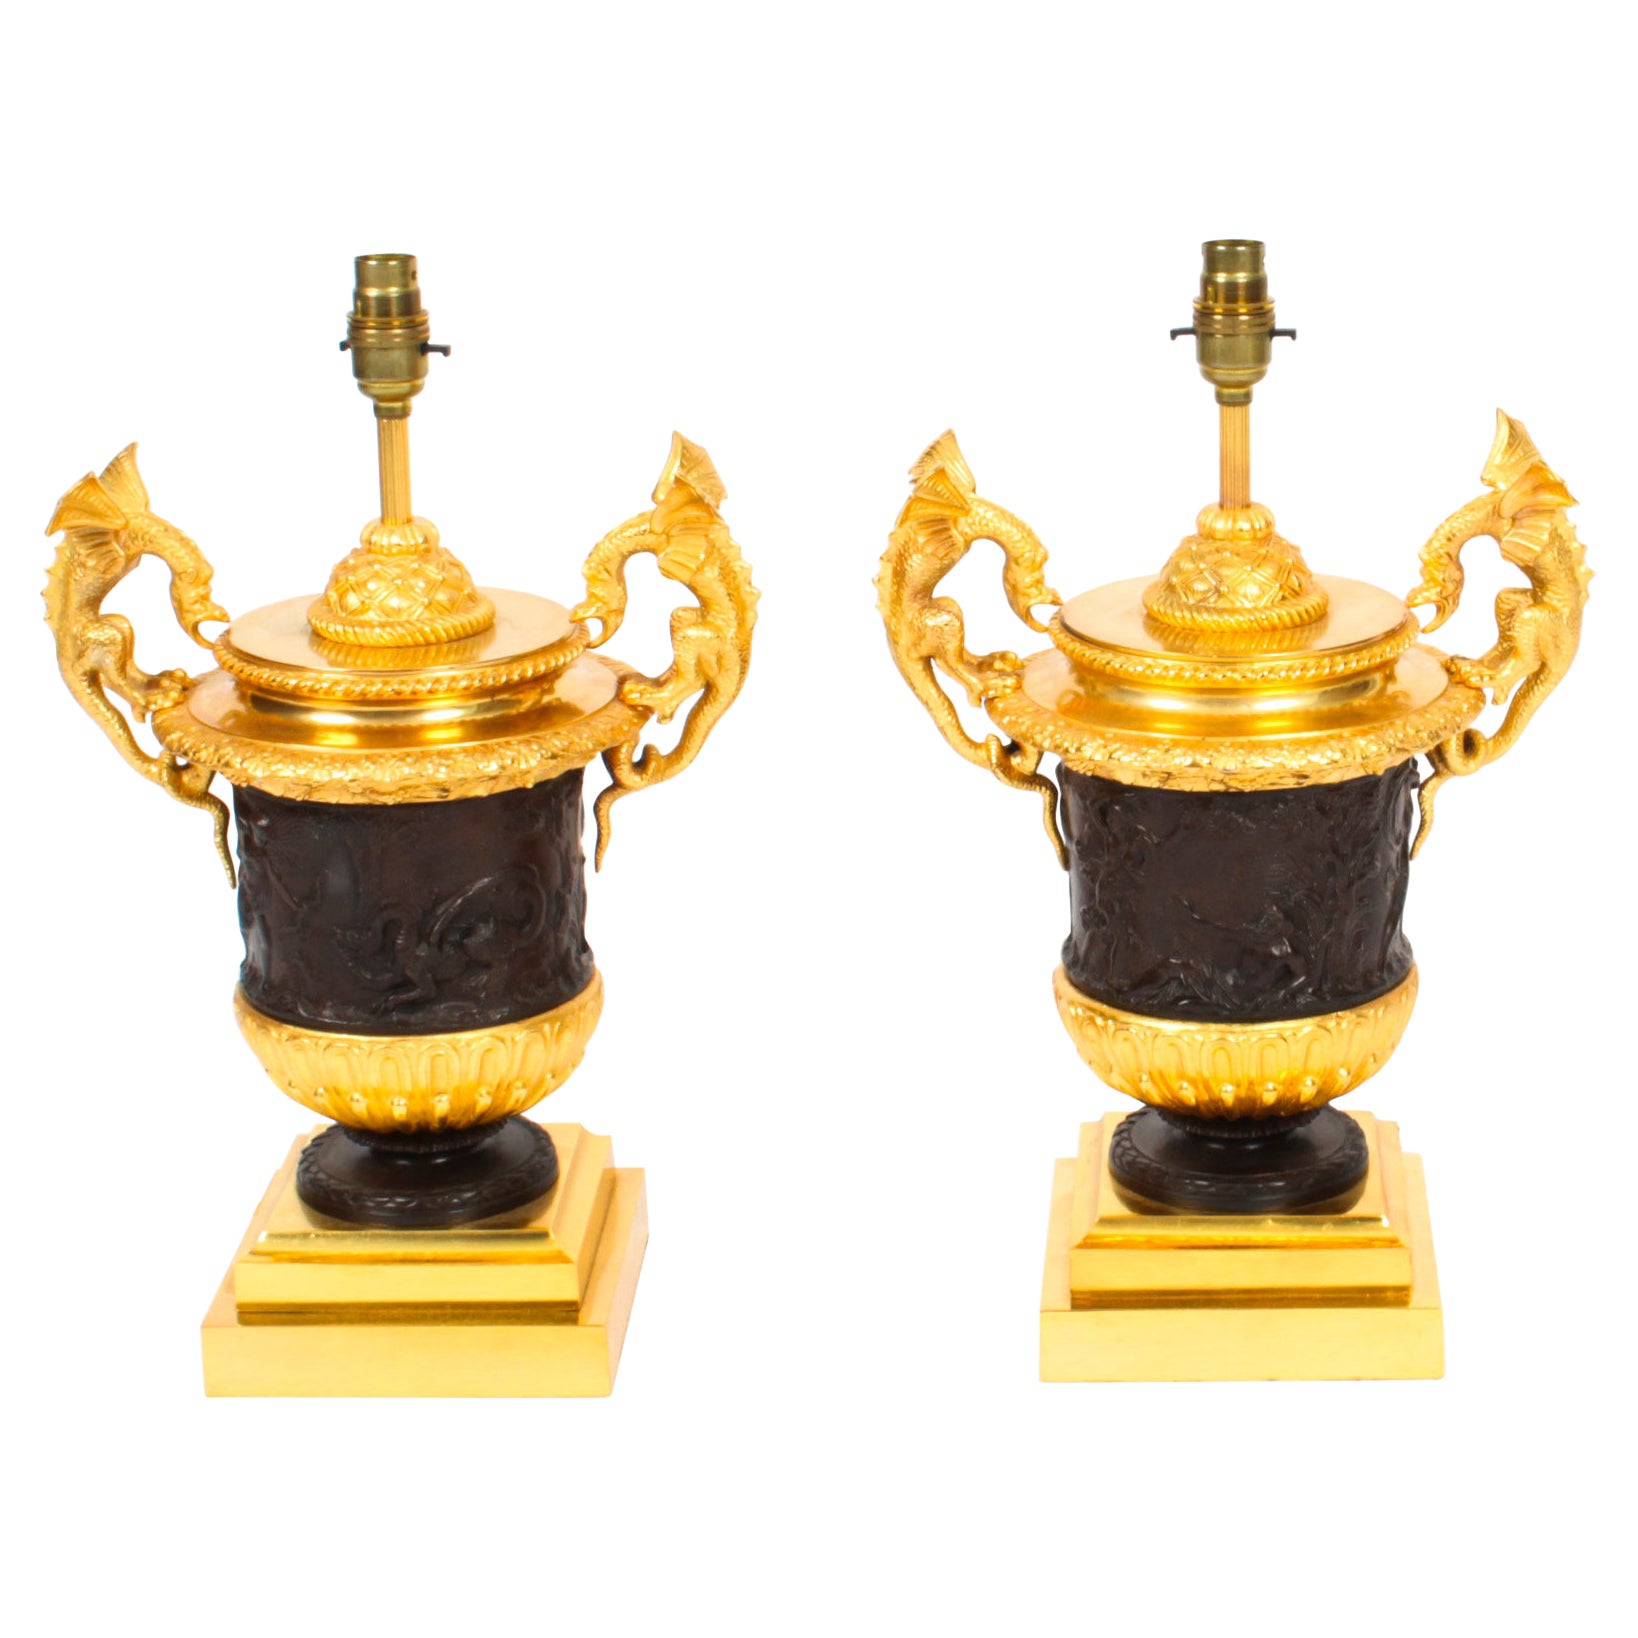 Vintage Pair Ormolu & Patinated Bronze Urn Table Lamps 20th C